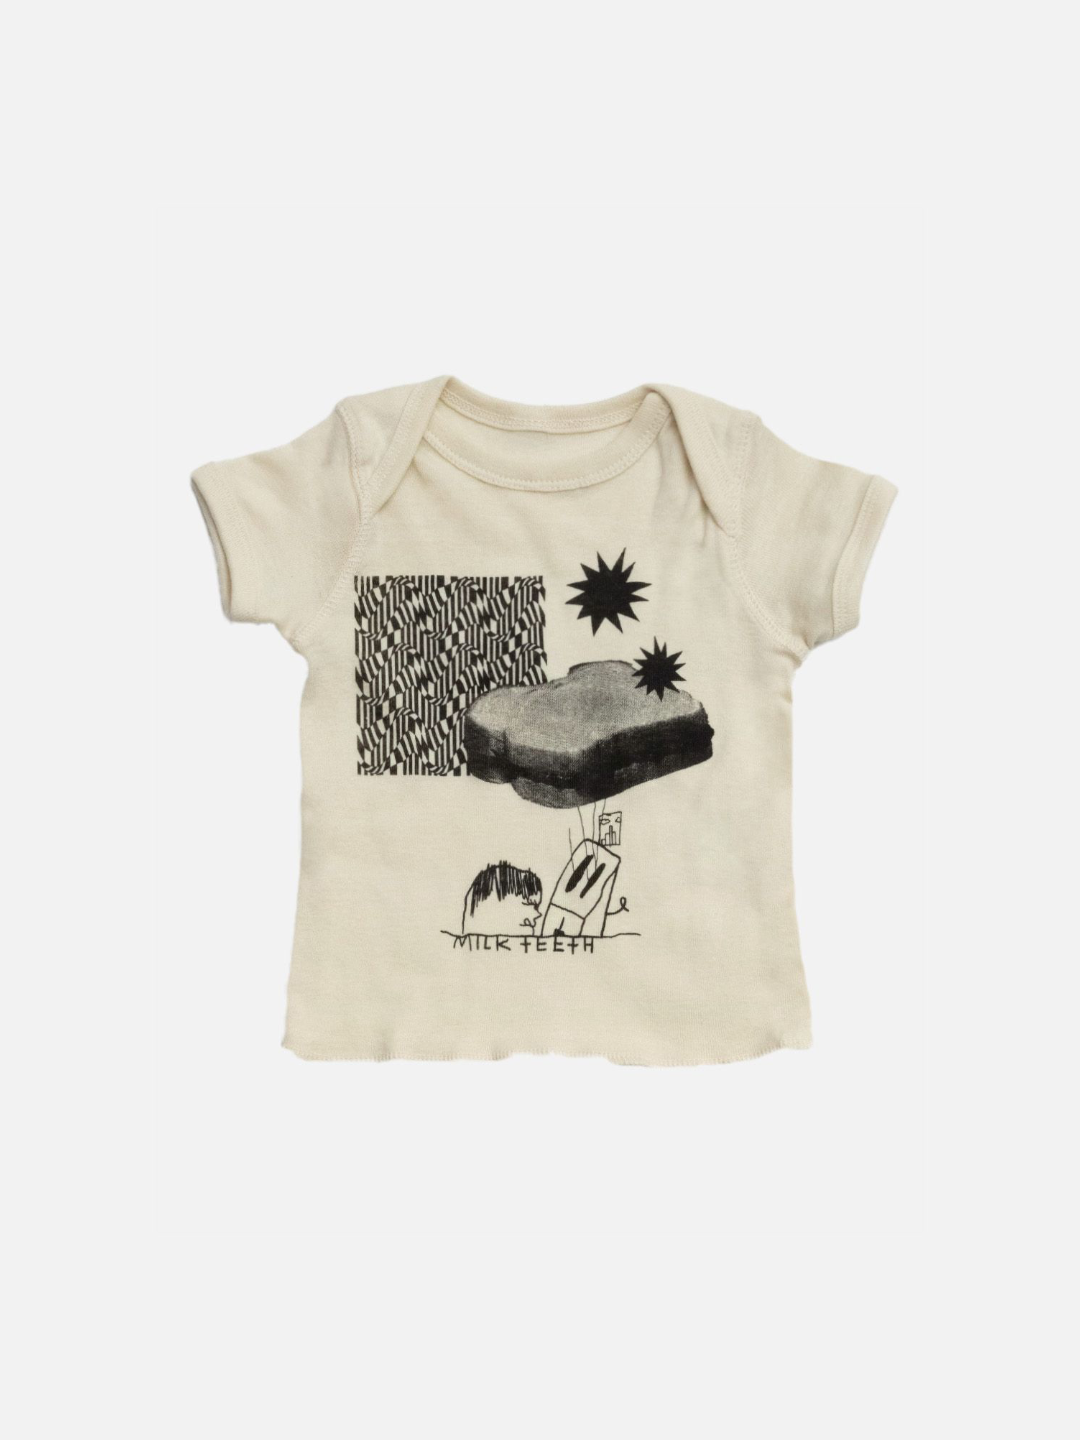 A baby tee shirt with lap shoulders, printed with a PBJ sandwich, star and zigzag patterns, a toaster and the words Milk Teeth